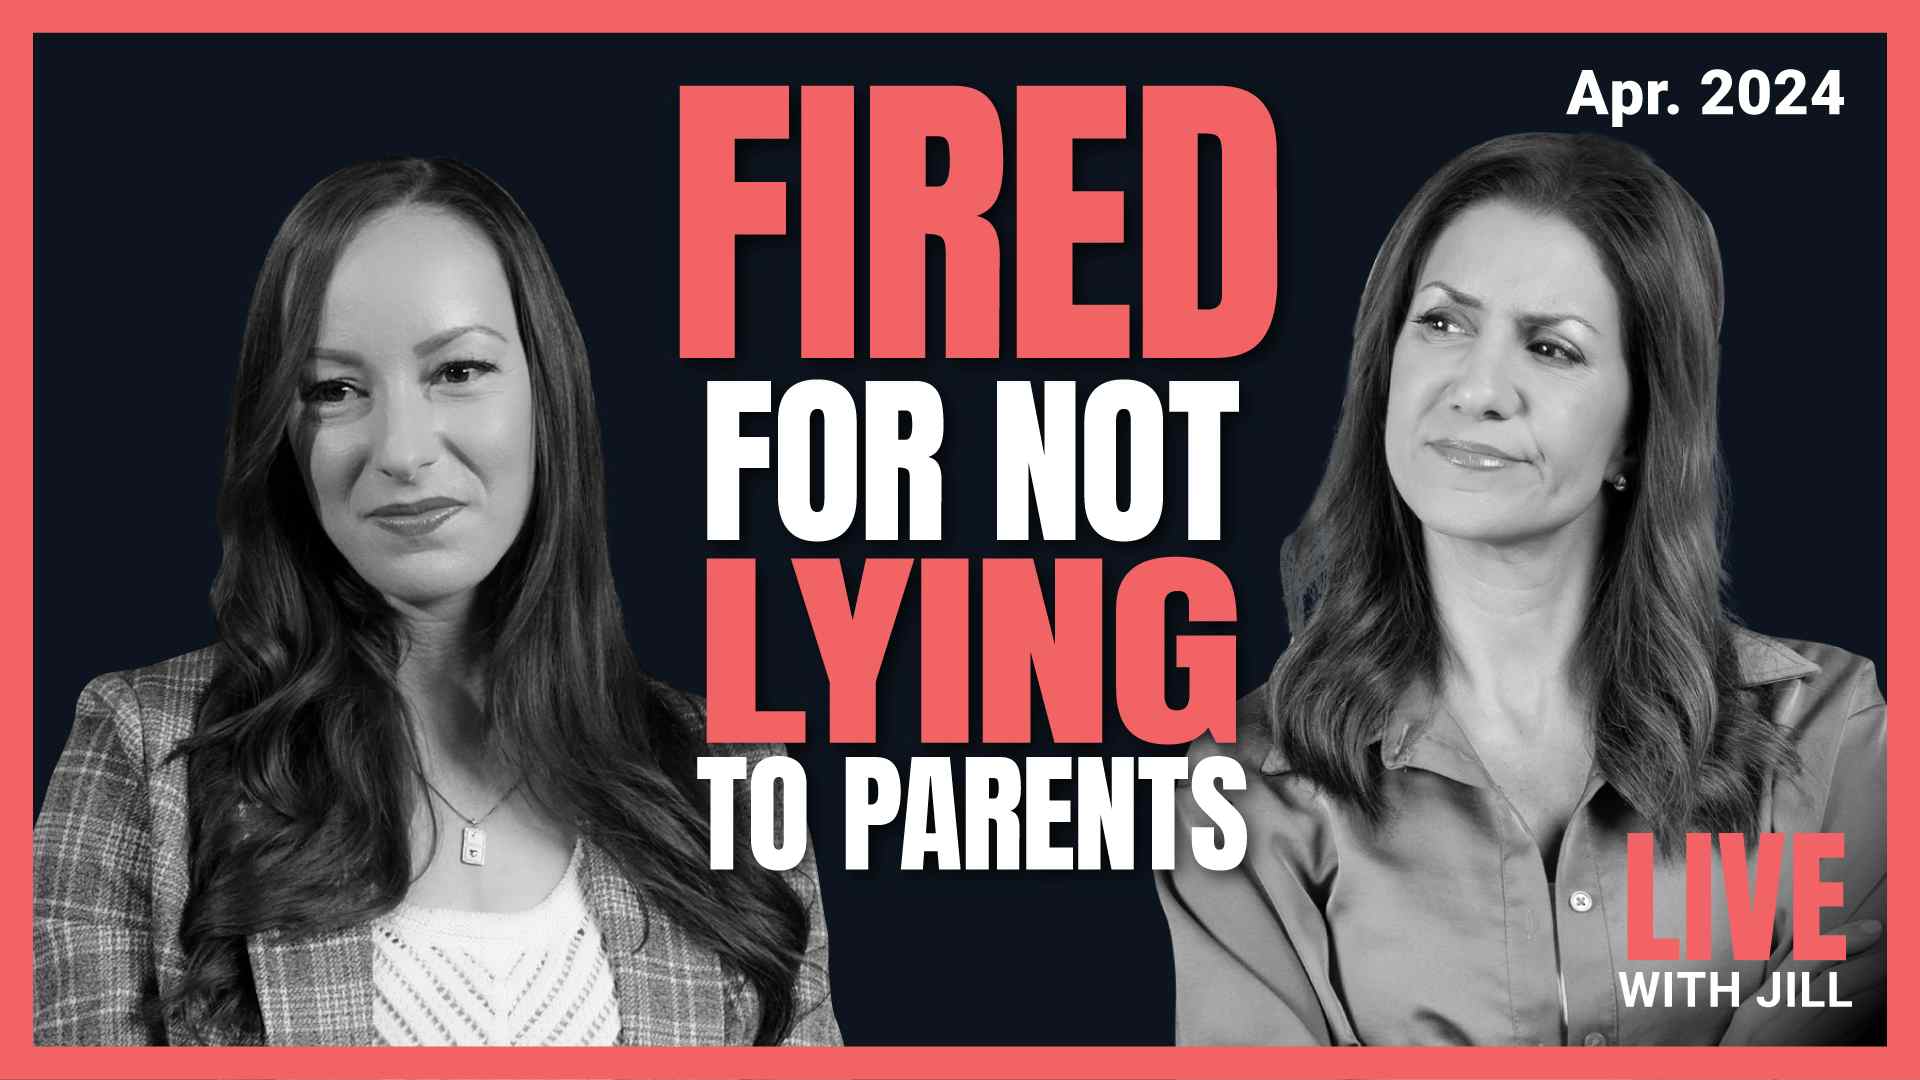 Fired for Not Lying to Parents?